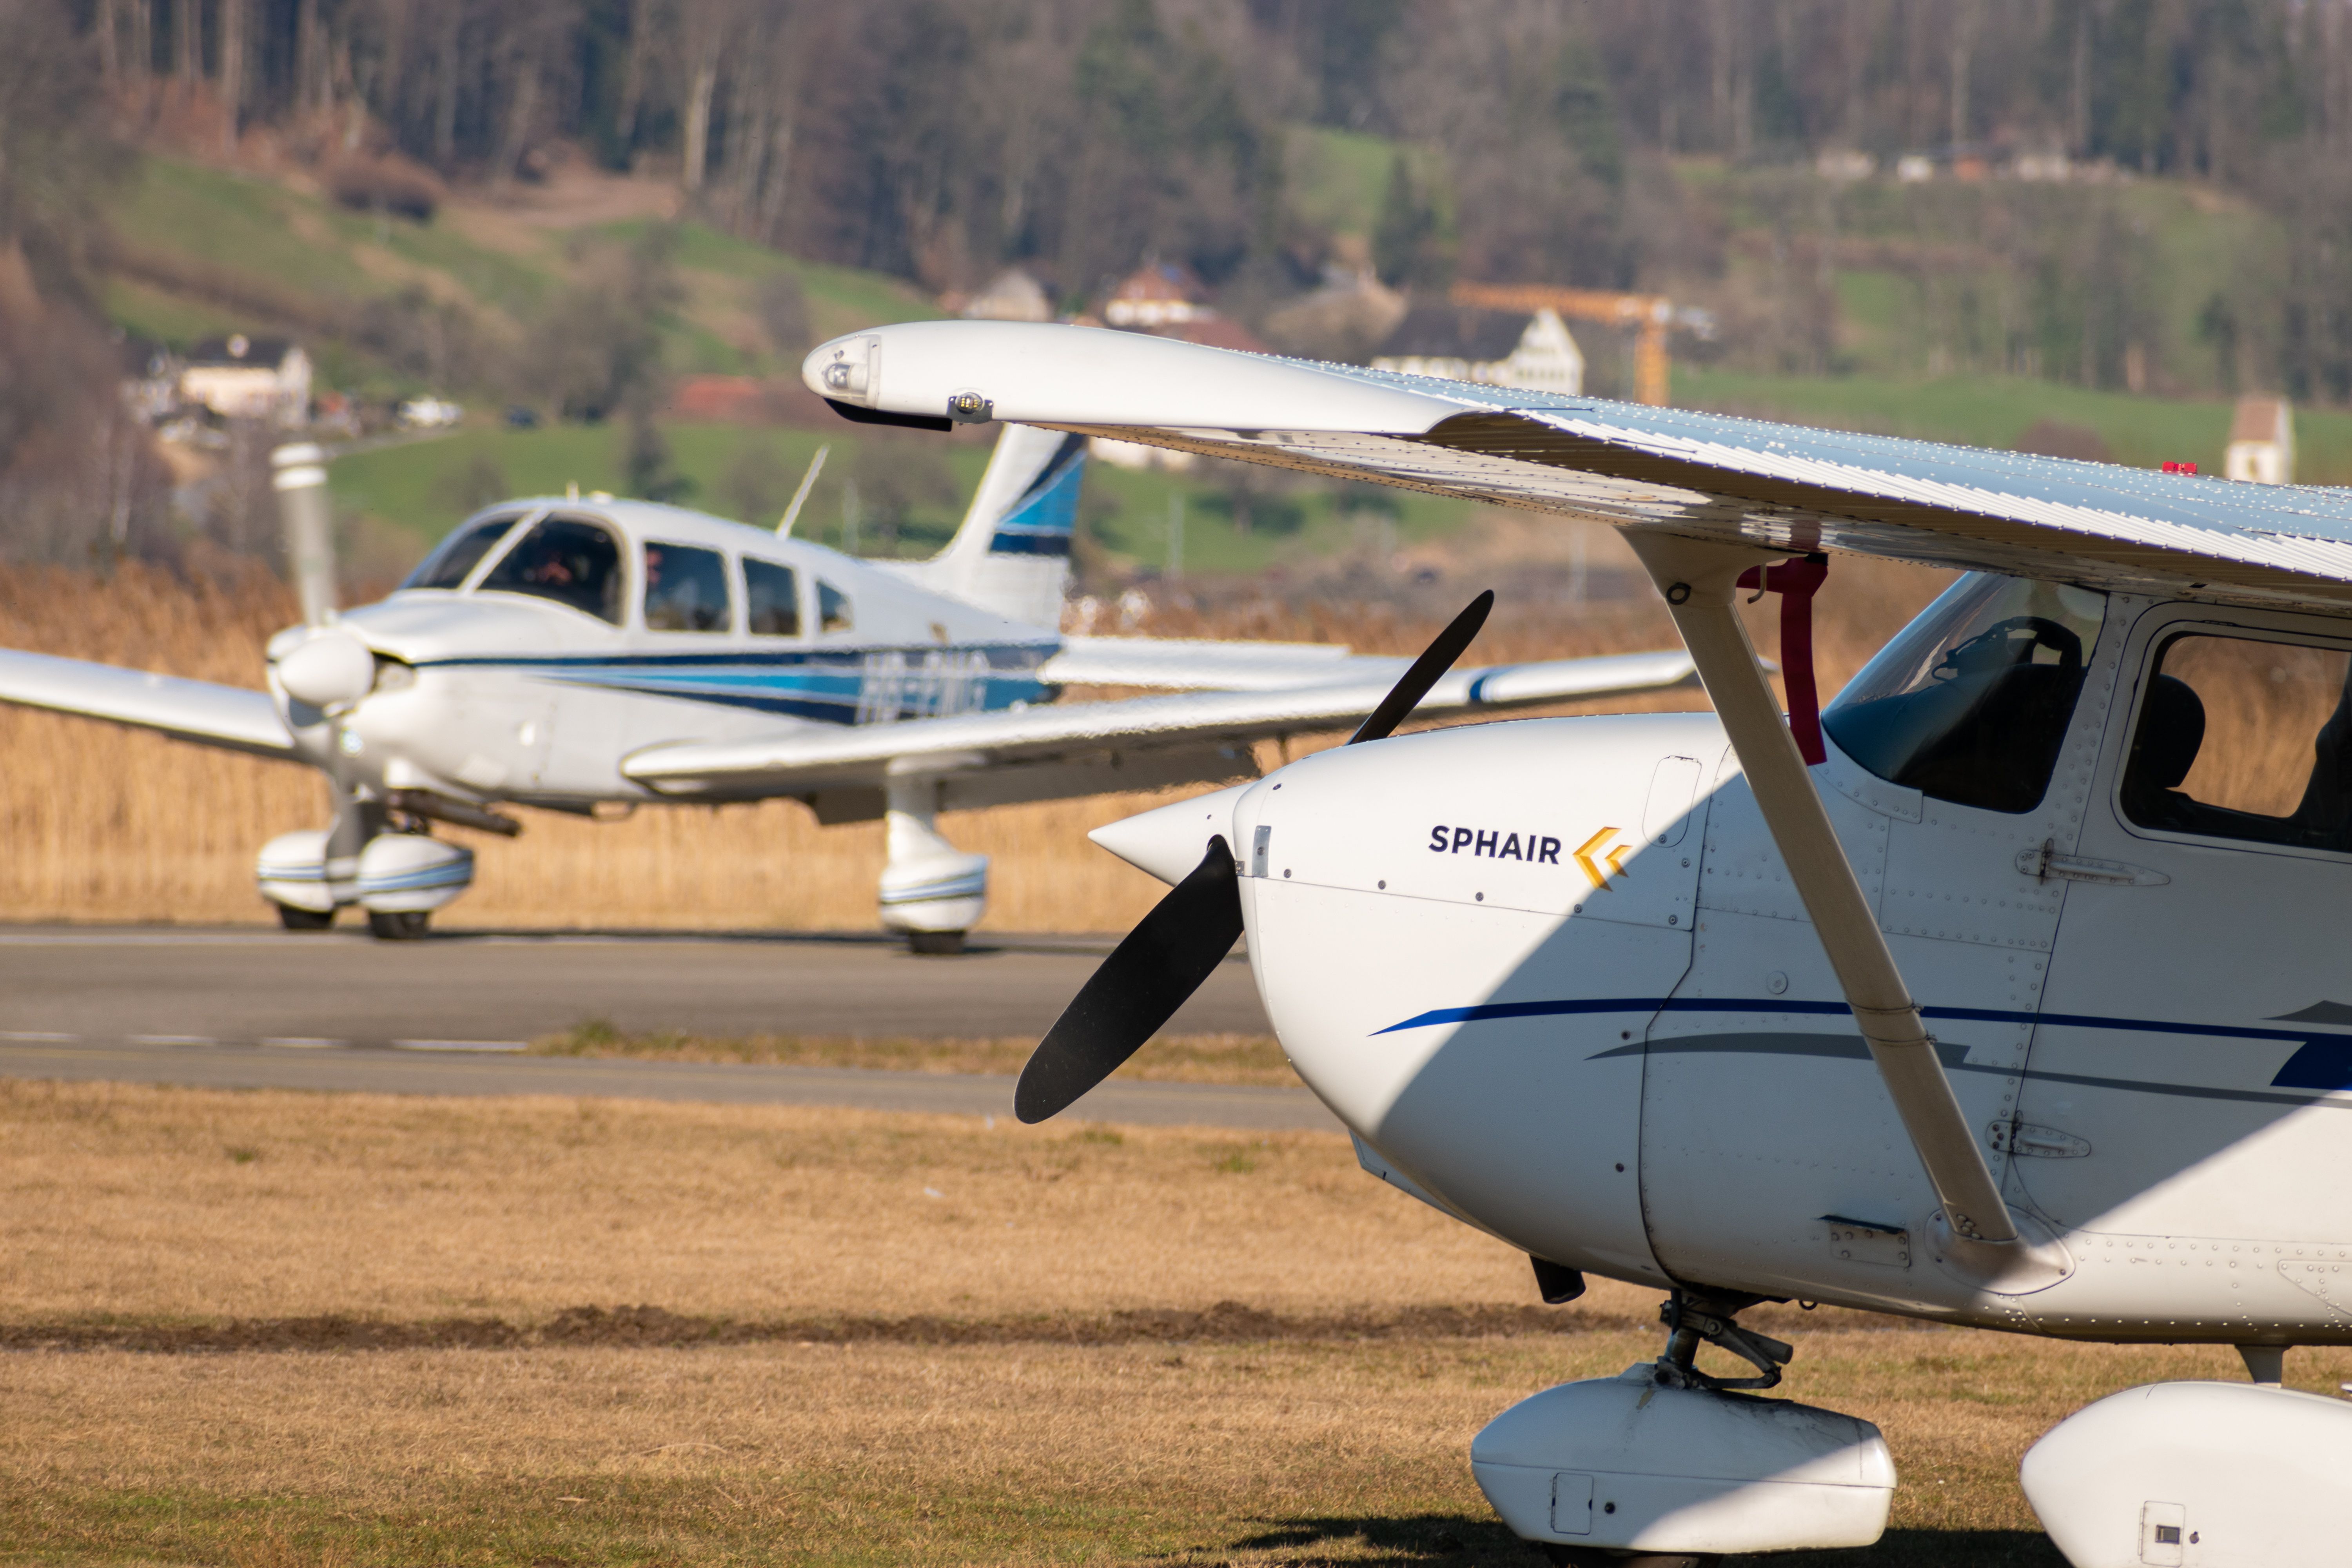 Cessna 172 and a Piper PA28-181 Archer II propeller plane at the parking area on a small airfield.